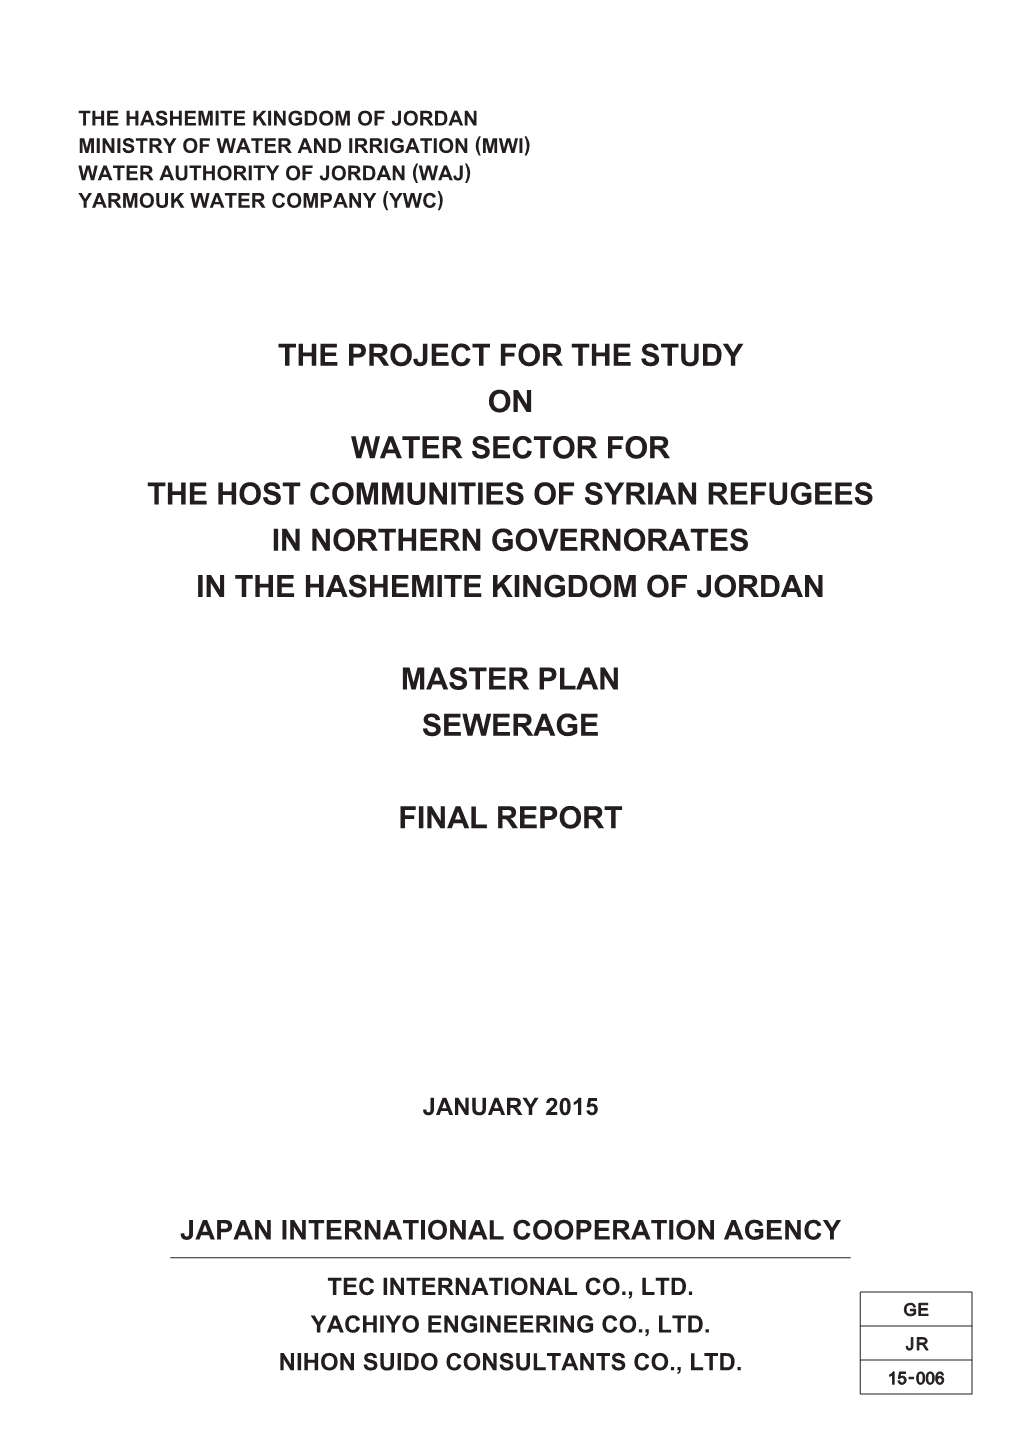 The Project for the Study on Water Sector for the Host Communities of Syrian Refugees in Northern Governorates in the Hashemite Kingdom of Jordan